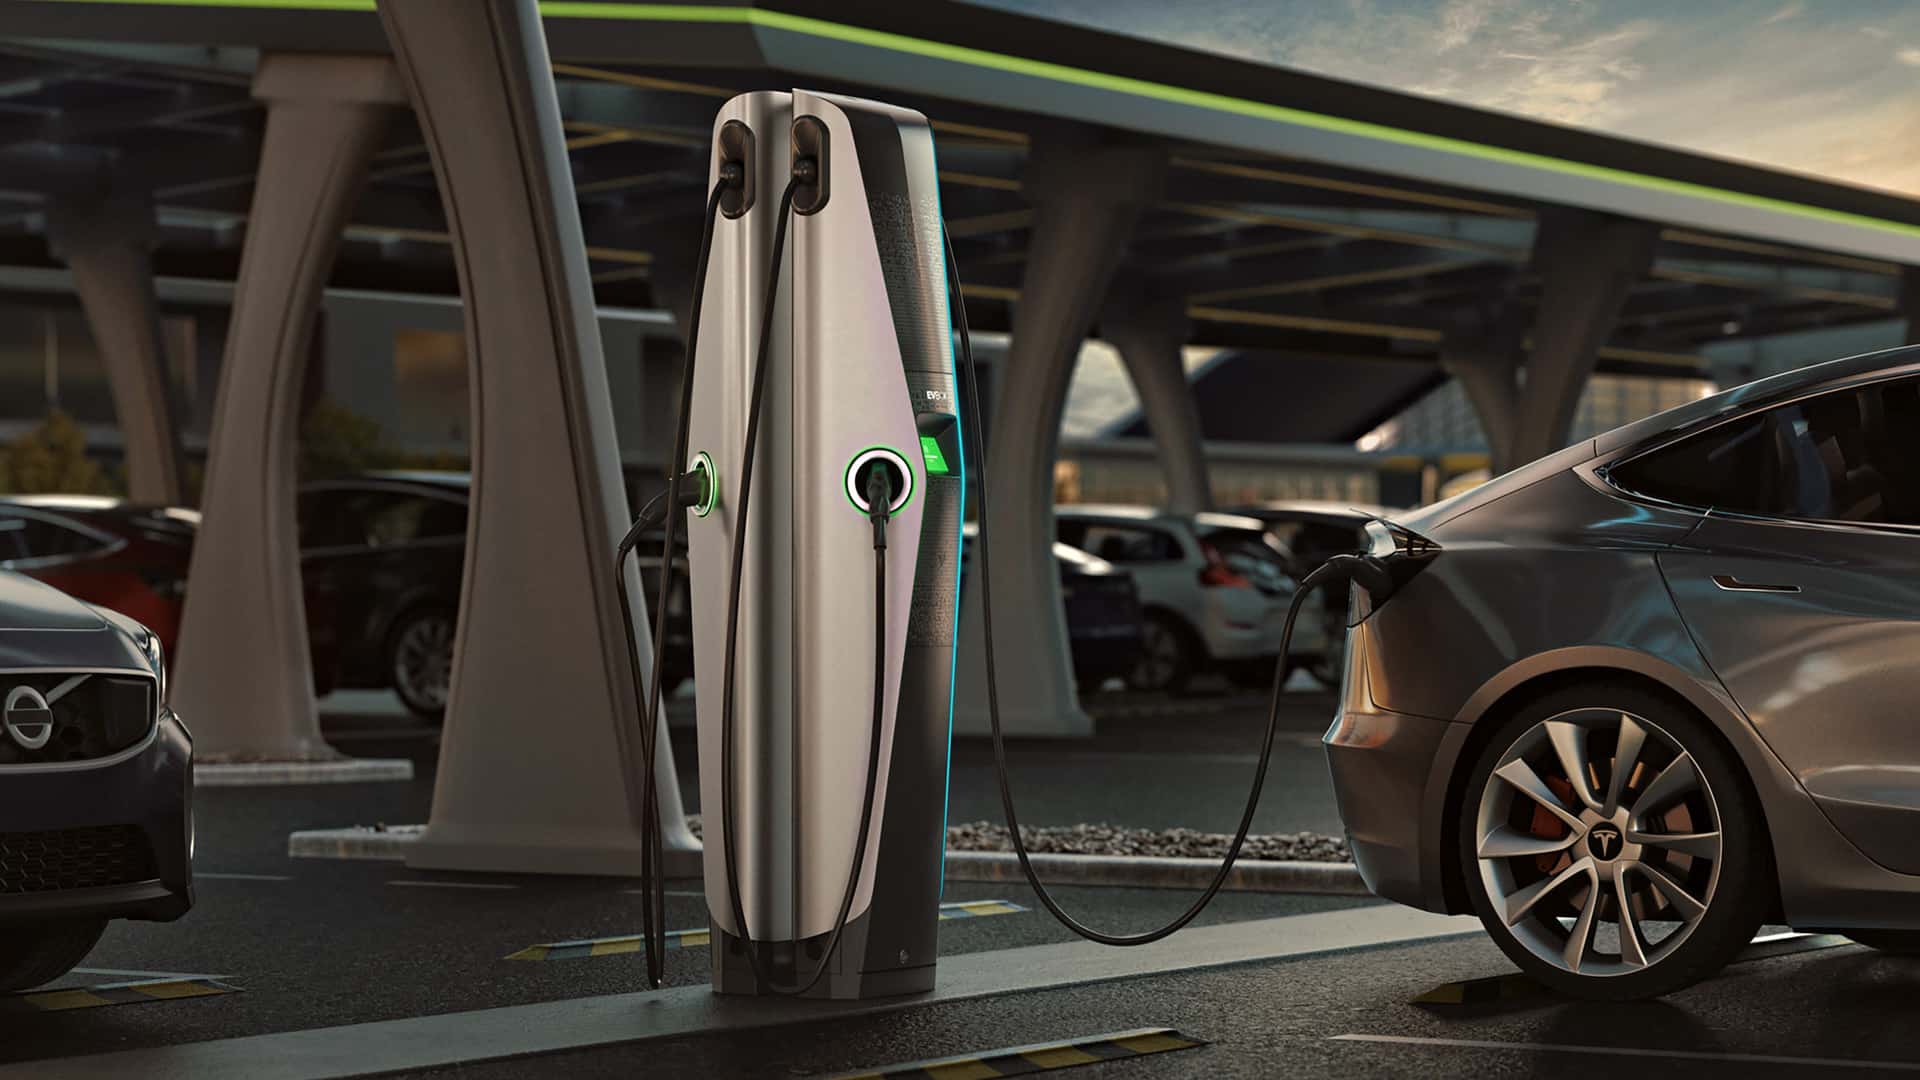 US to install half million electric vehicle charging stations